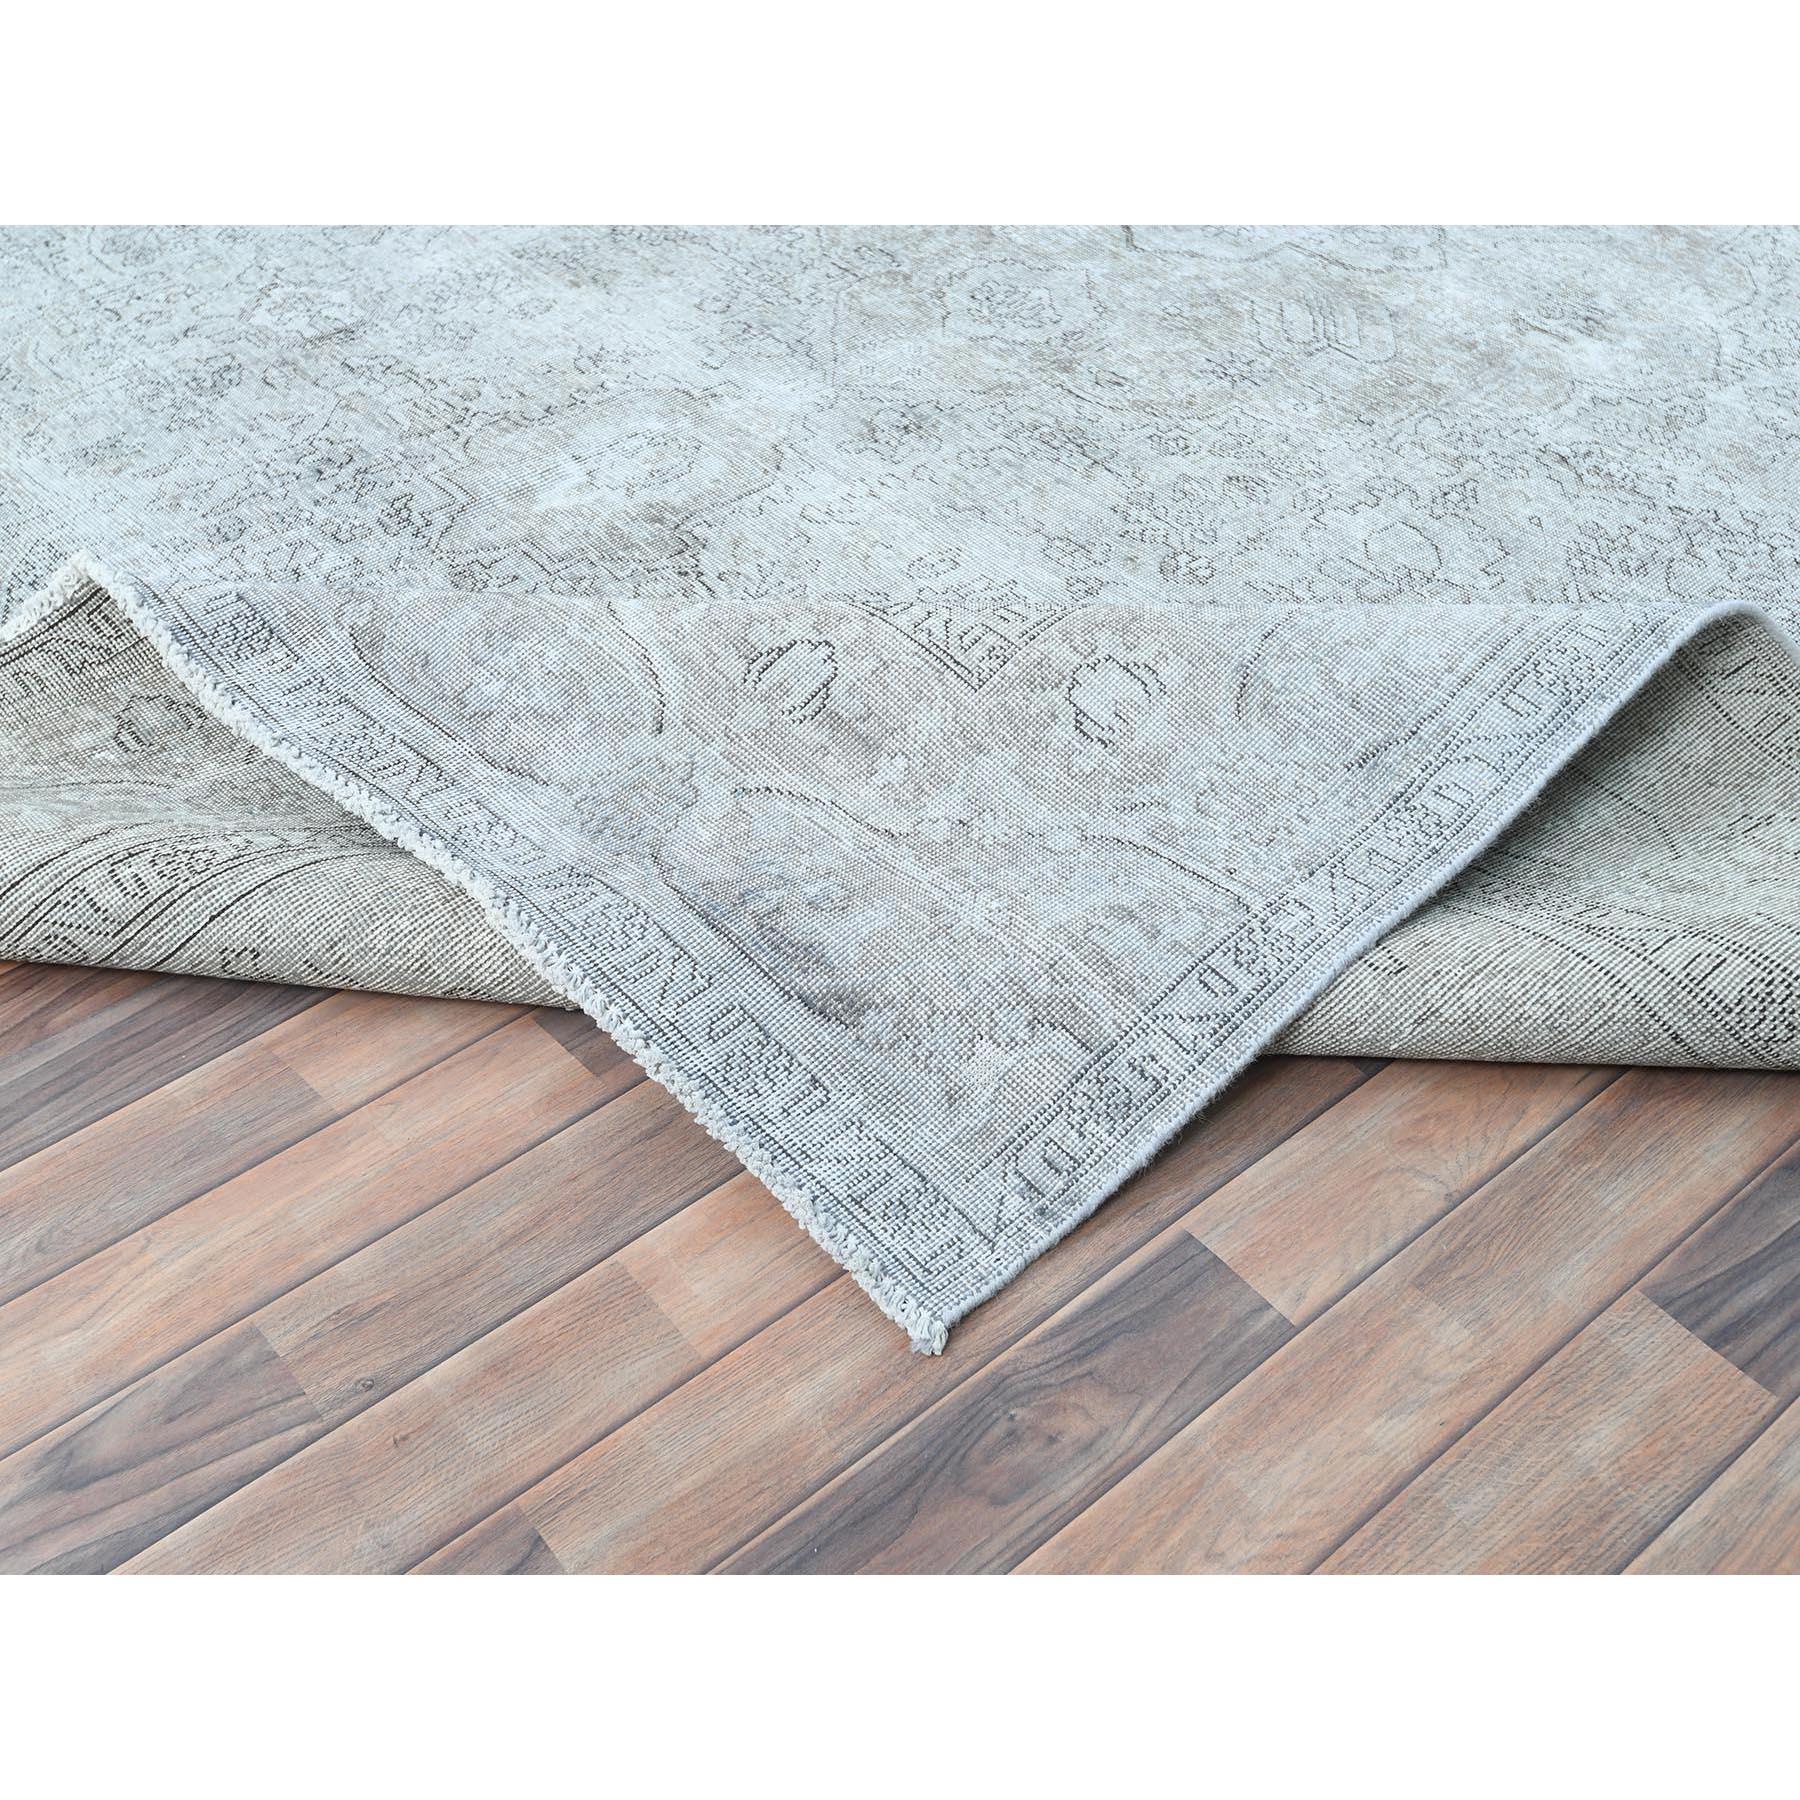 Blueish Gray Worn Down Rustic Feel Wool Hand Knotted Vintage Persian Tabriz Rug For Sale 1